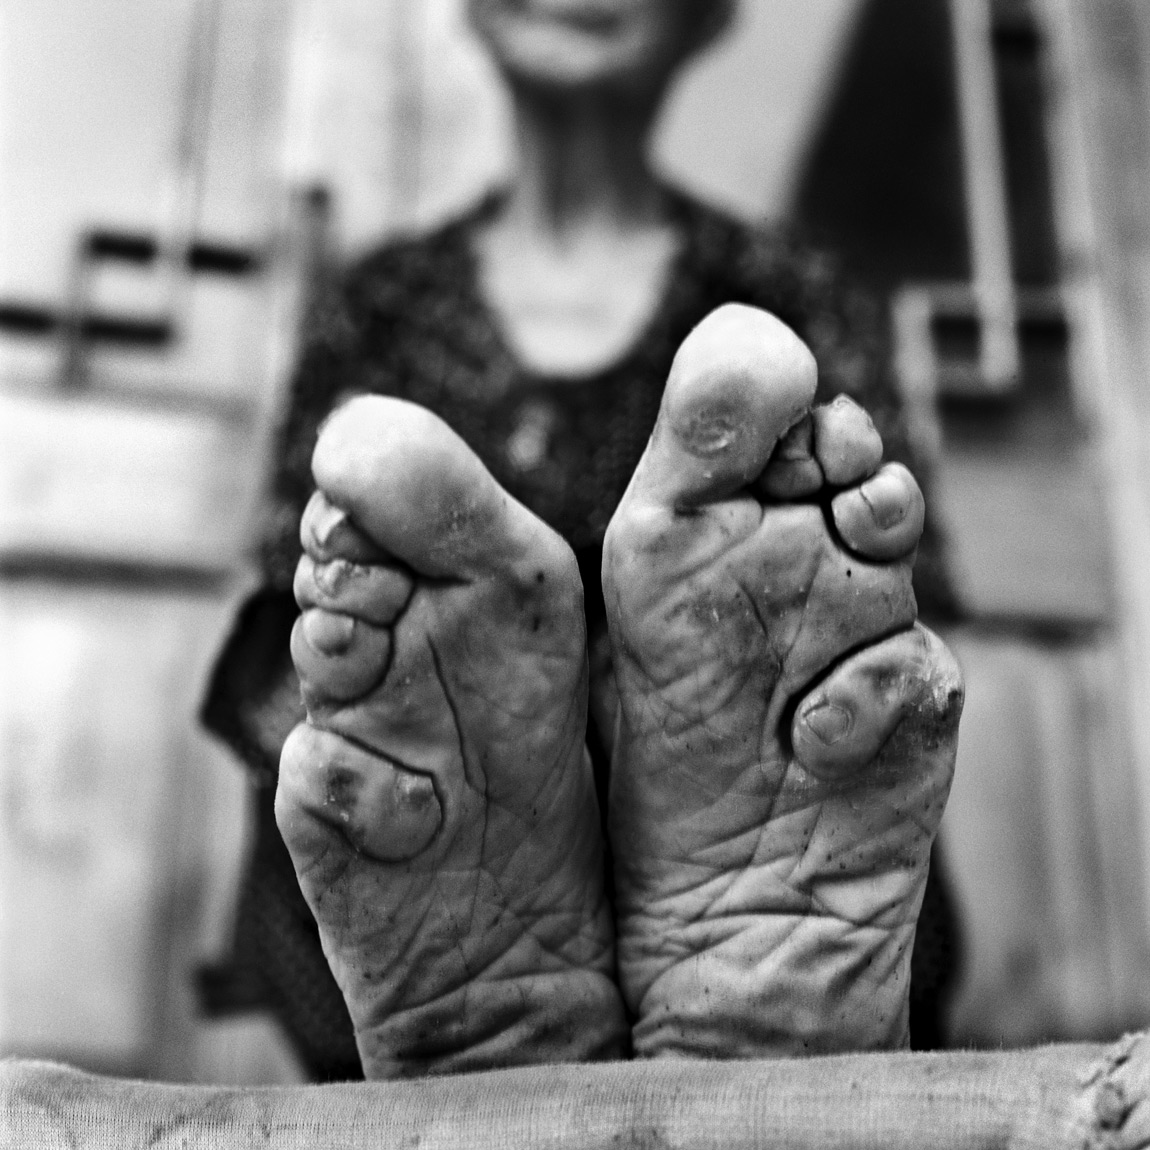 China Photo Story: The Last Survivors of Crippling Foot Binding Tradition